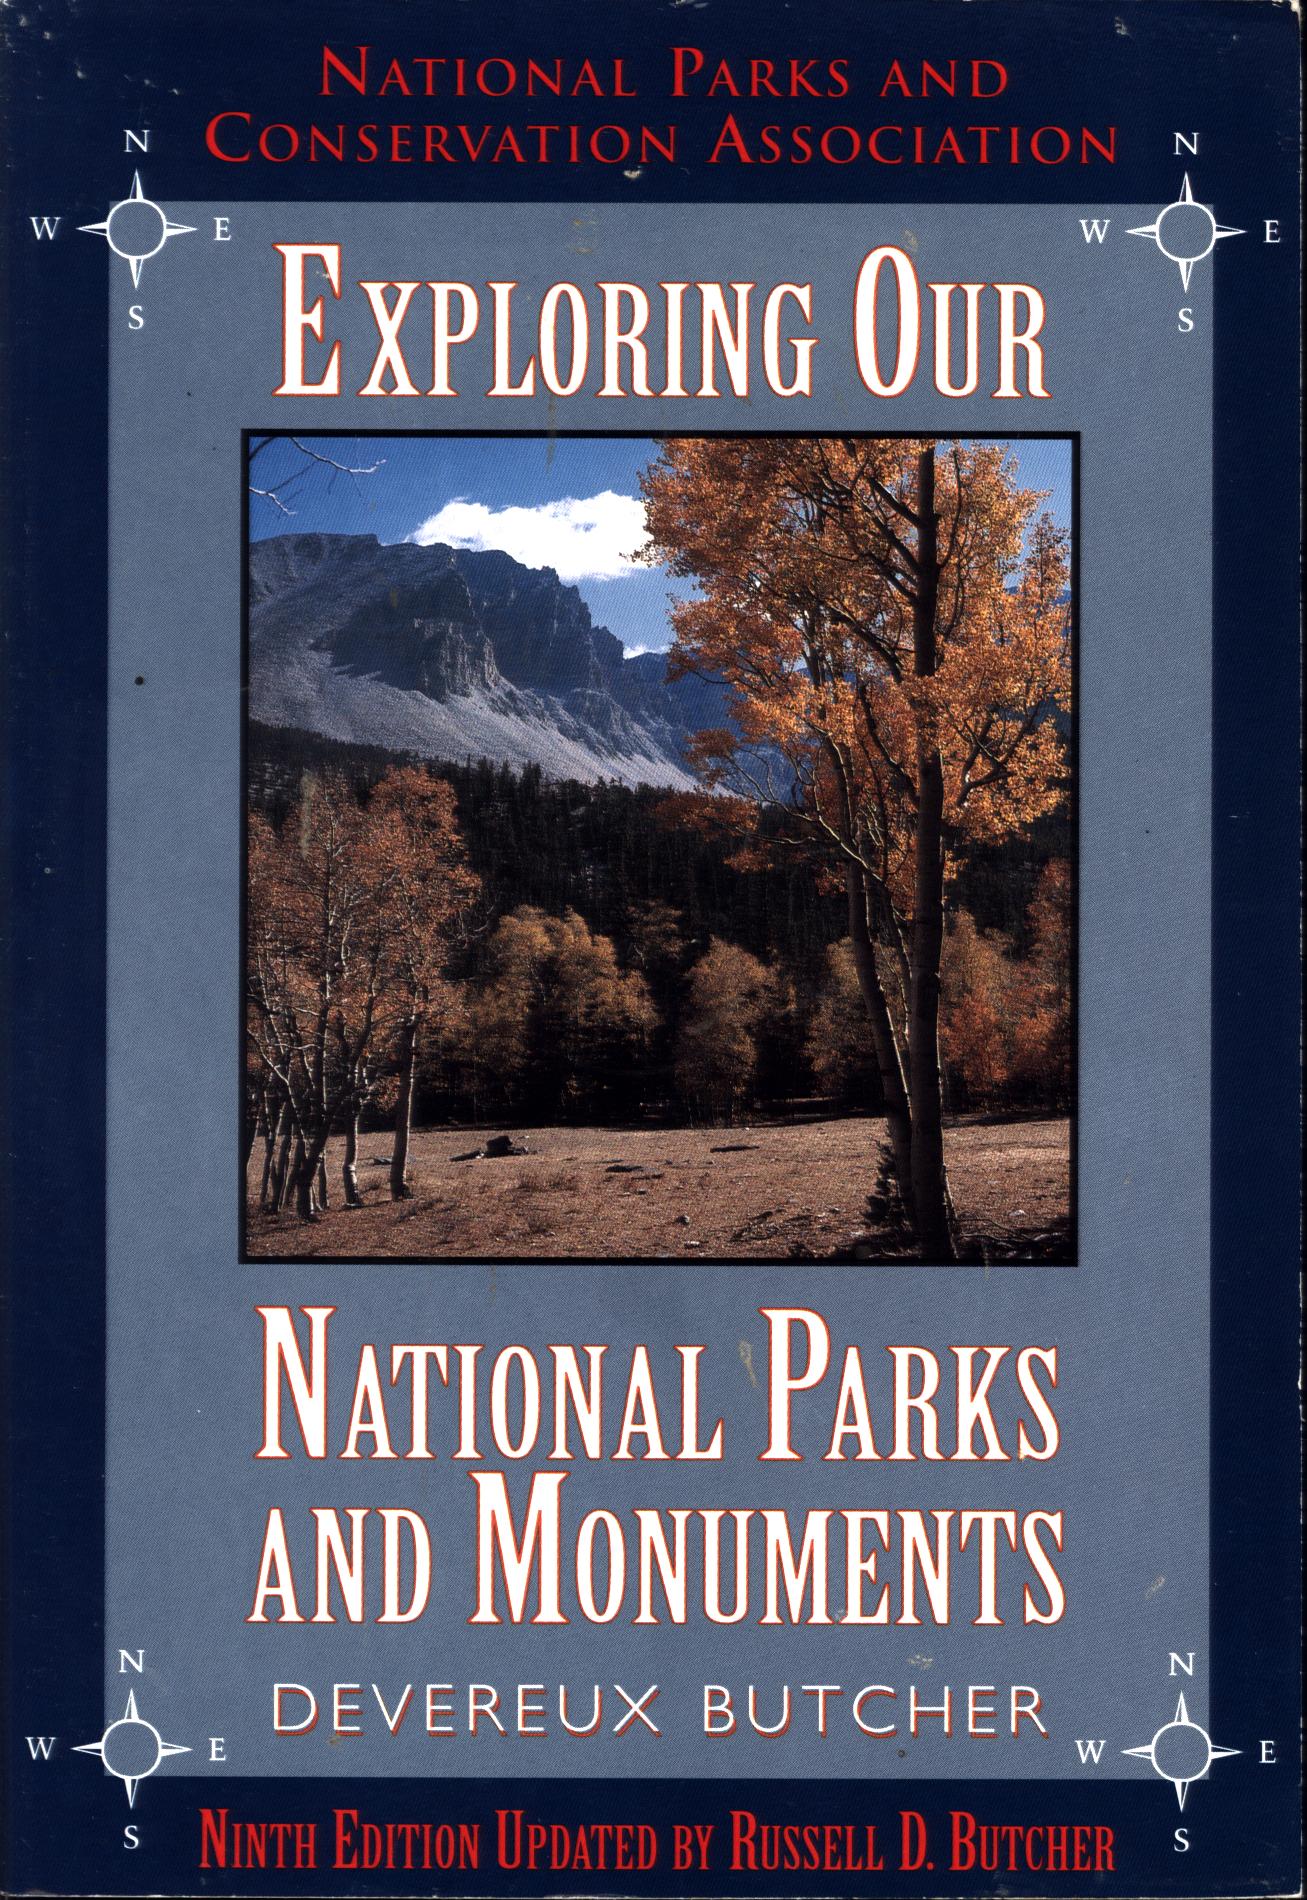 EXPLORING OUR NATIONAL PARKS AND MONUMENTS. 